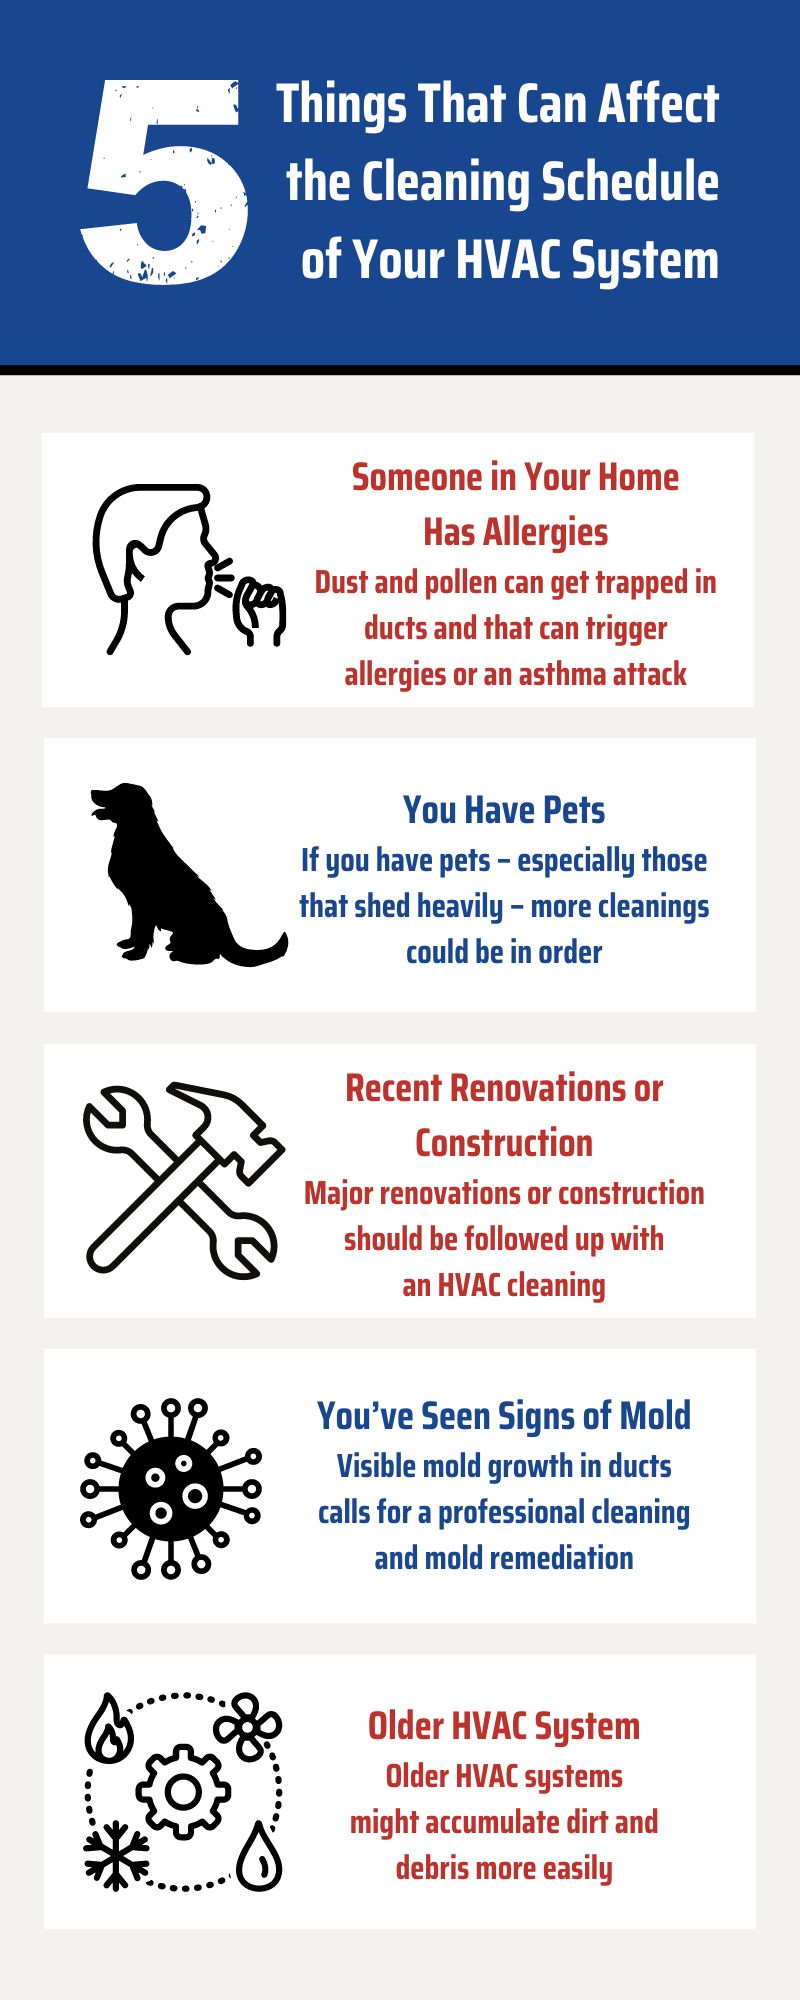 original infographic stating 5 Things That Can Affect the Cleaning Schedule of Your HVAC System